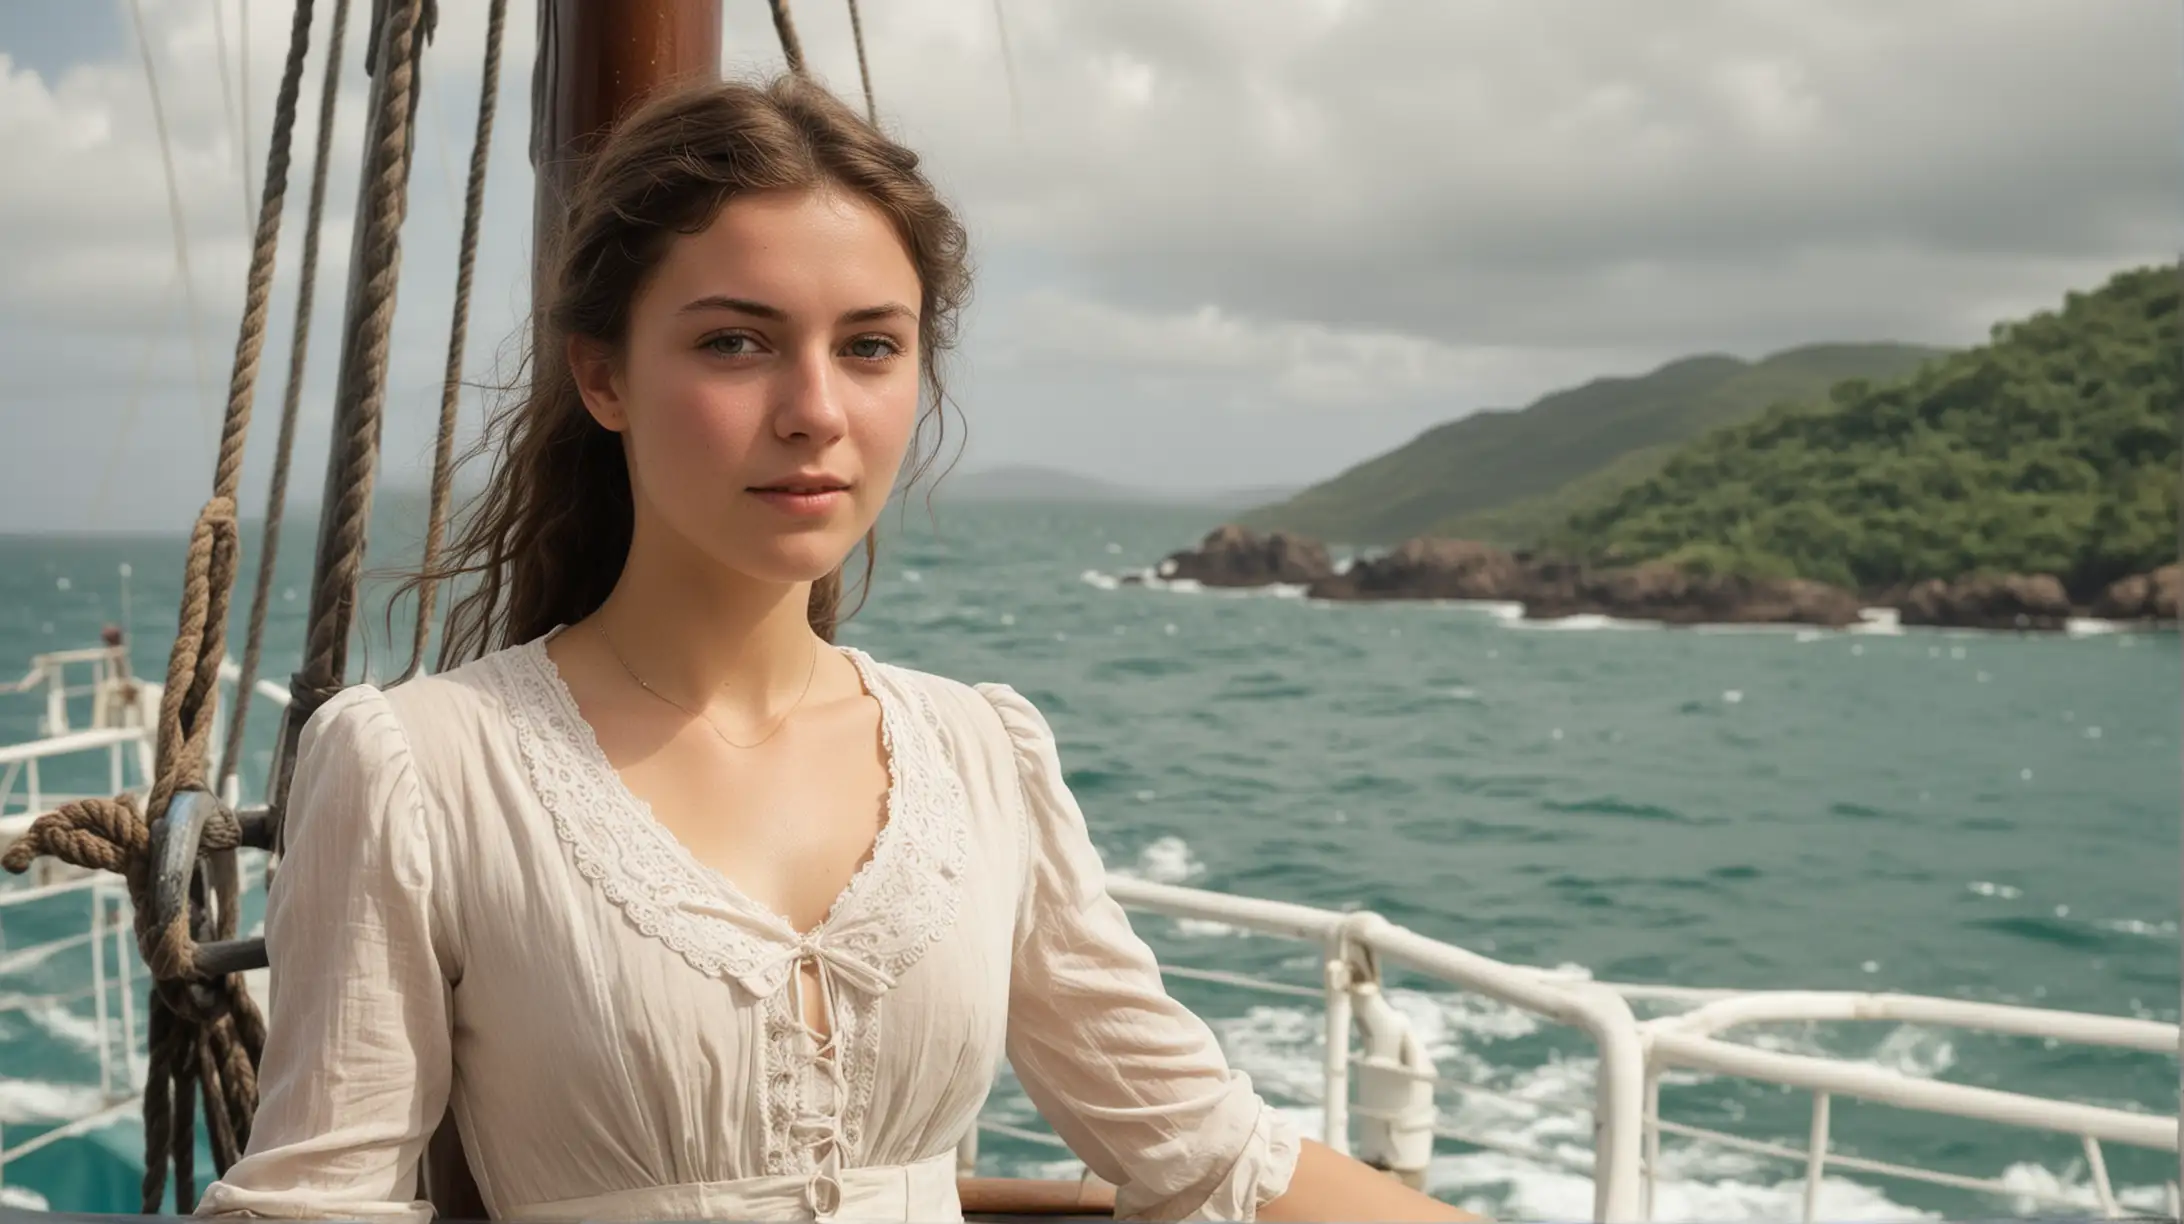 22 year old Young British wife 1880s, on a ship out at sea in the tropics, hot, sweaty